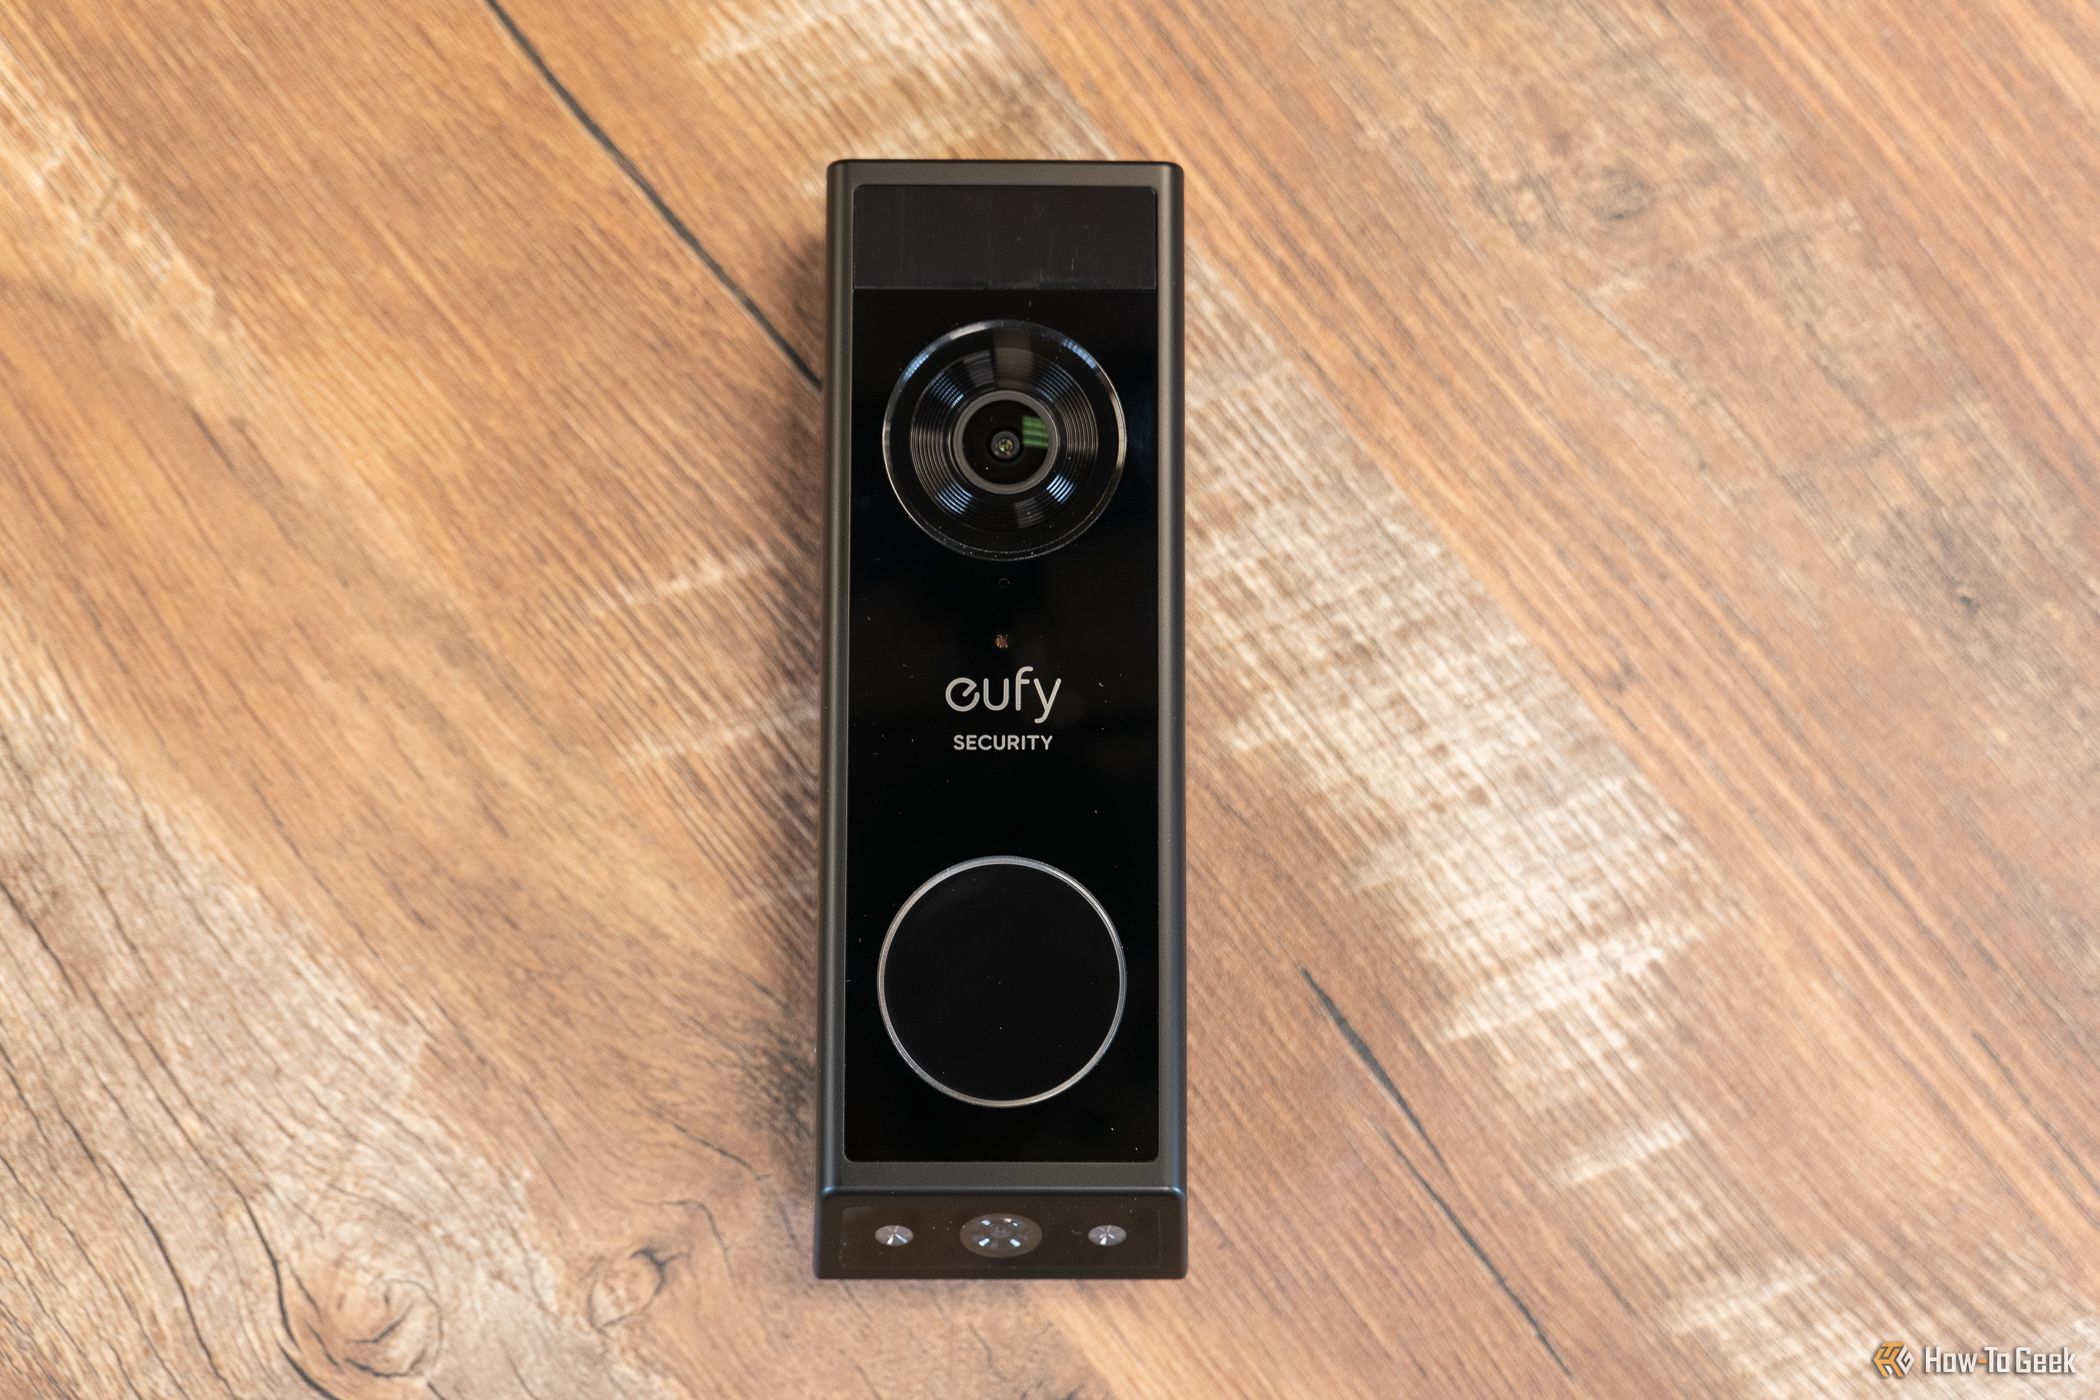 The eufy Security E340 Video Doorbell on a table